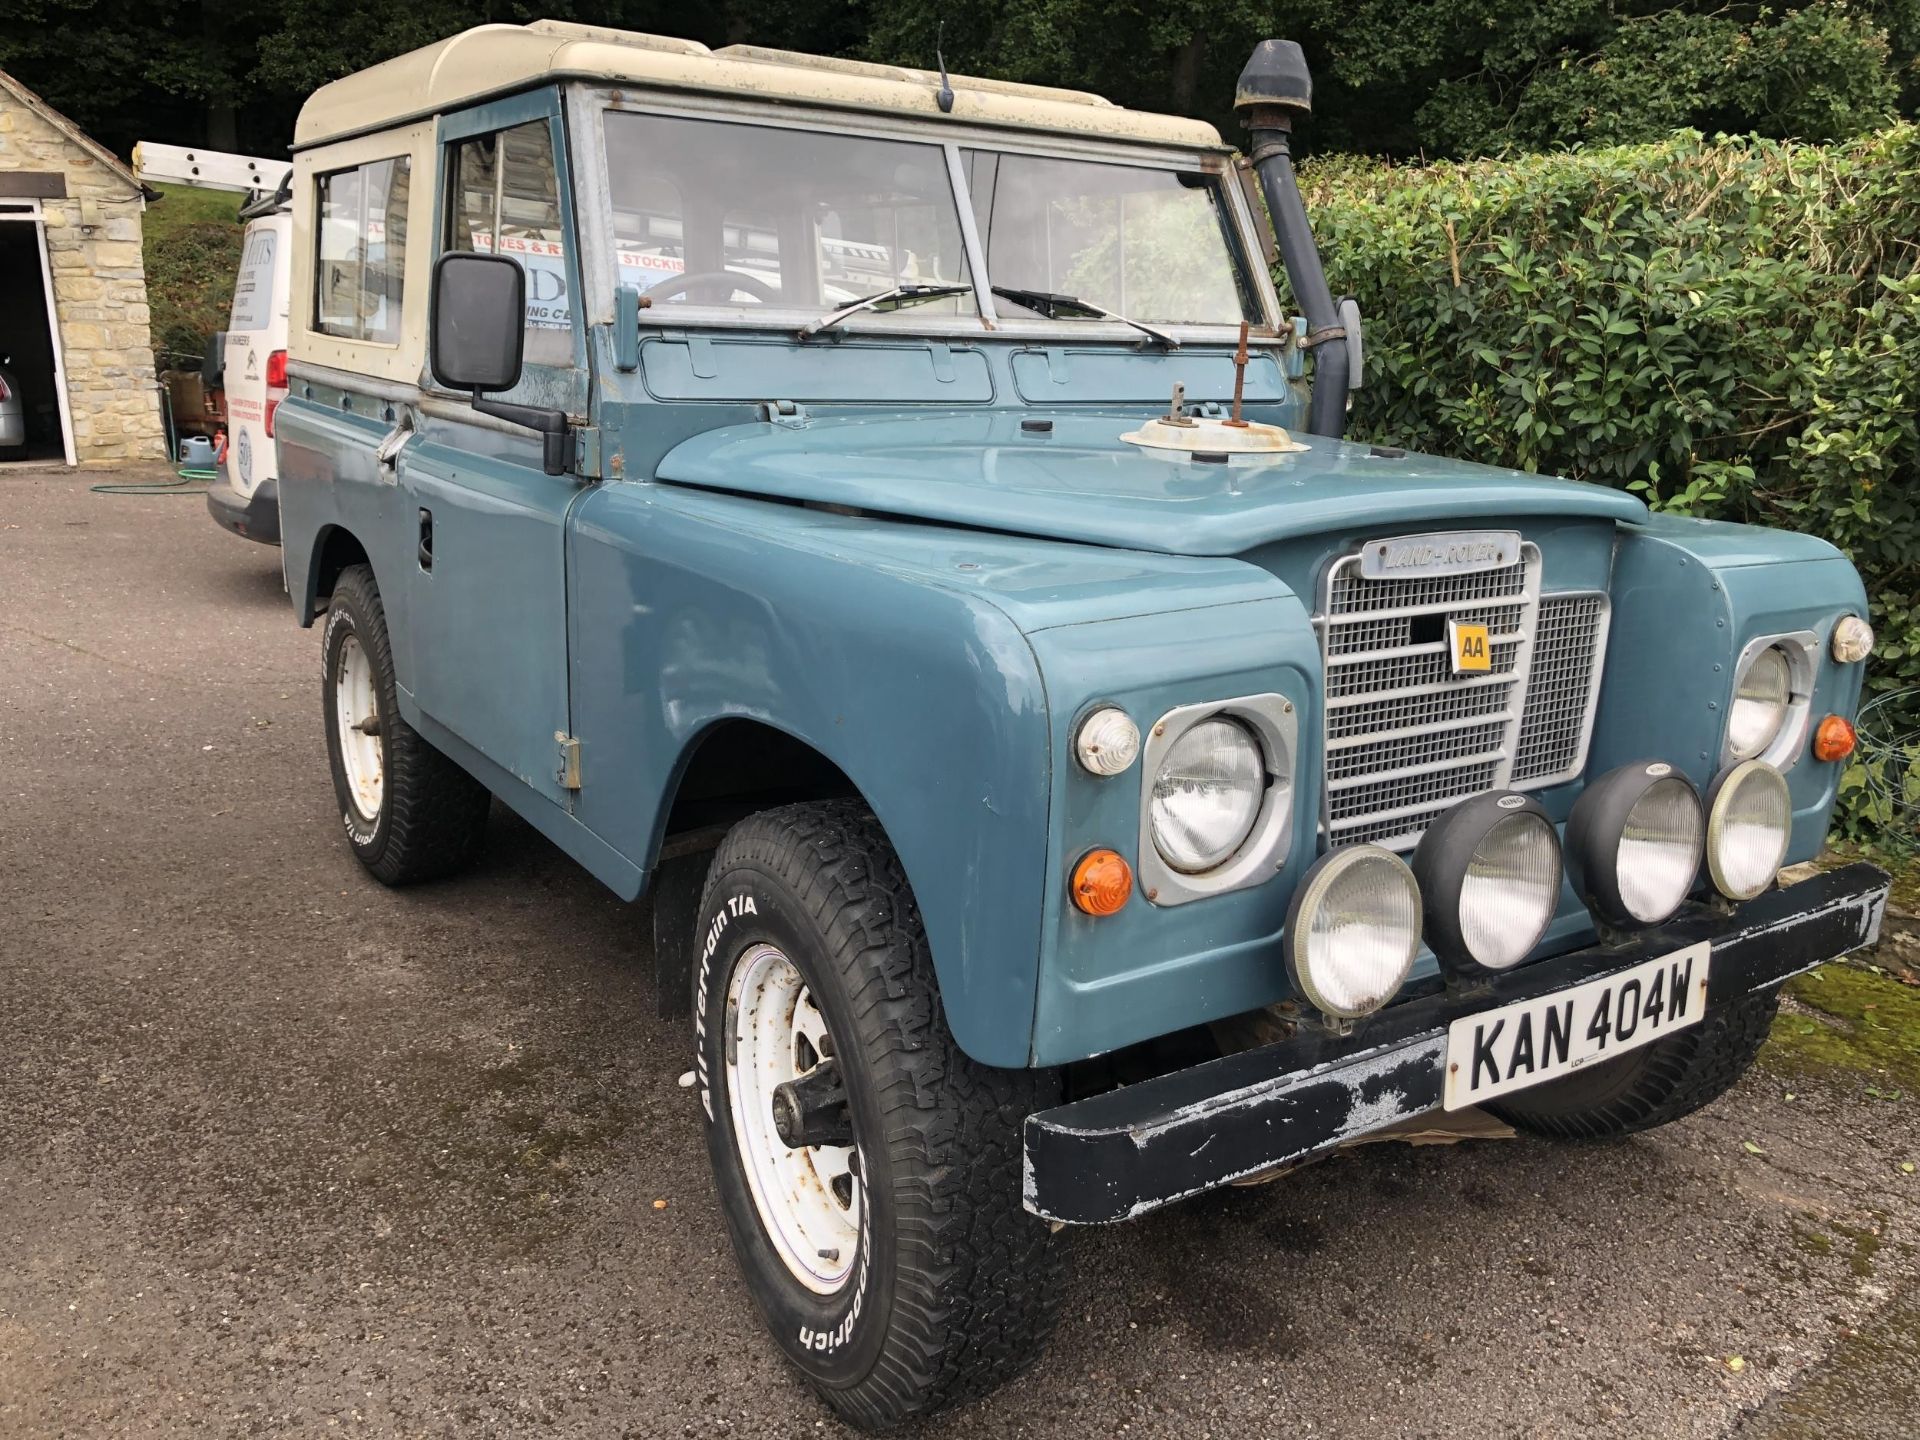 1981 Land Rover 88 inch Series III Registration number KAN 404W Blue with a white roof 2,286 cc - Image 3 of 51